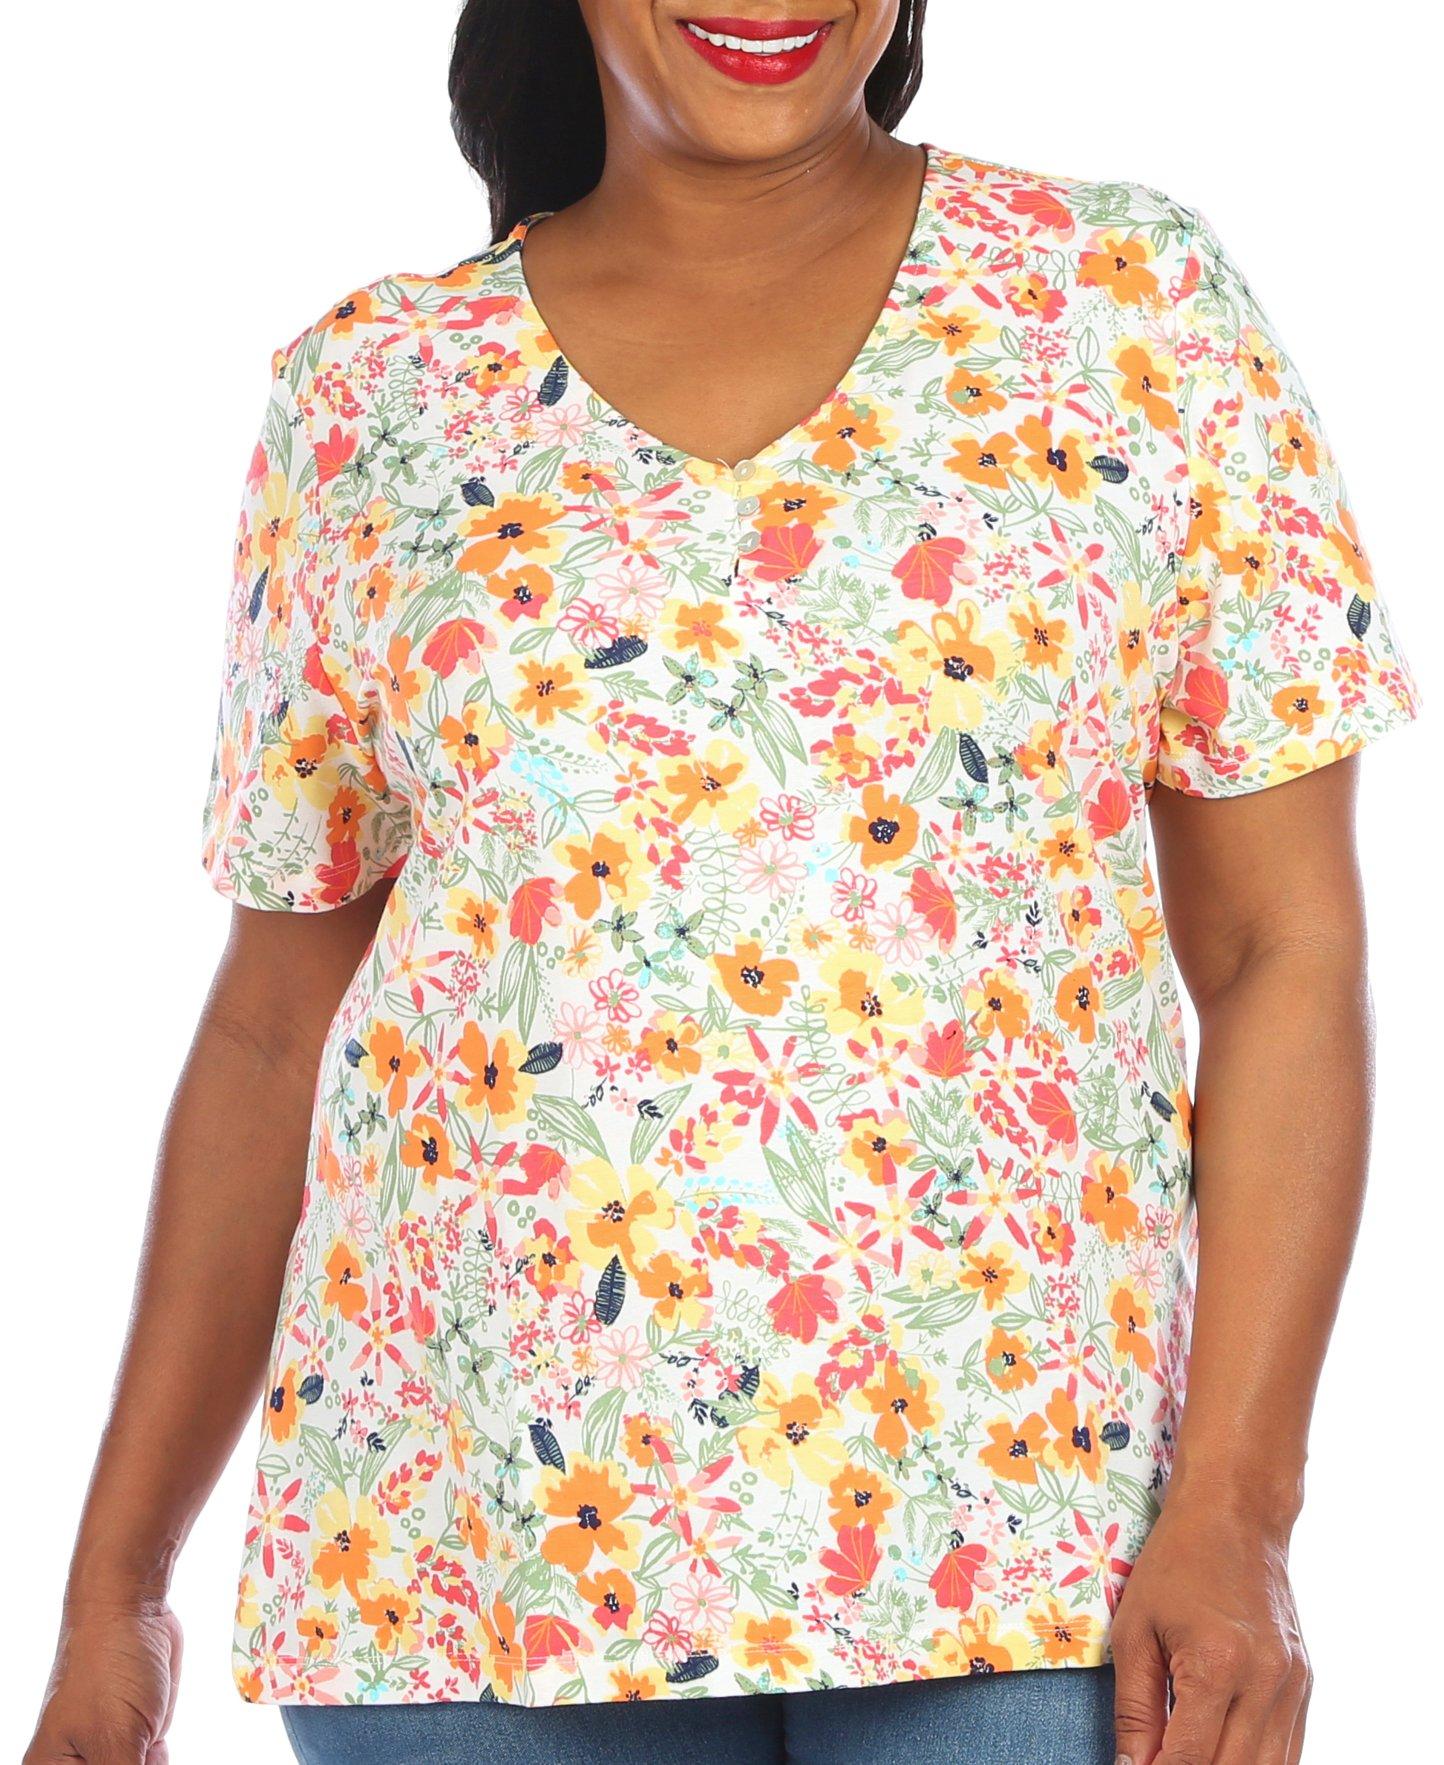 Coral Bay Plus Floral Print Henley Short Sleeve